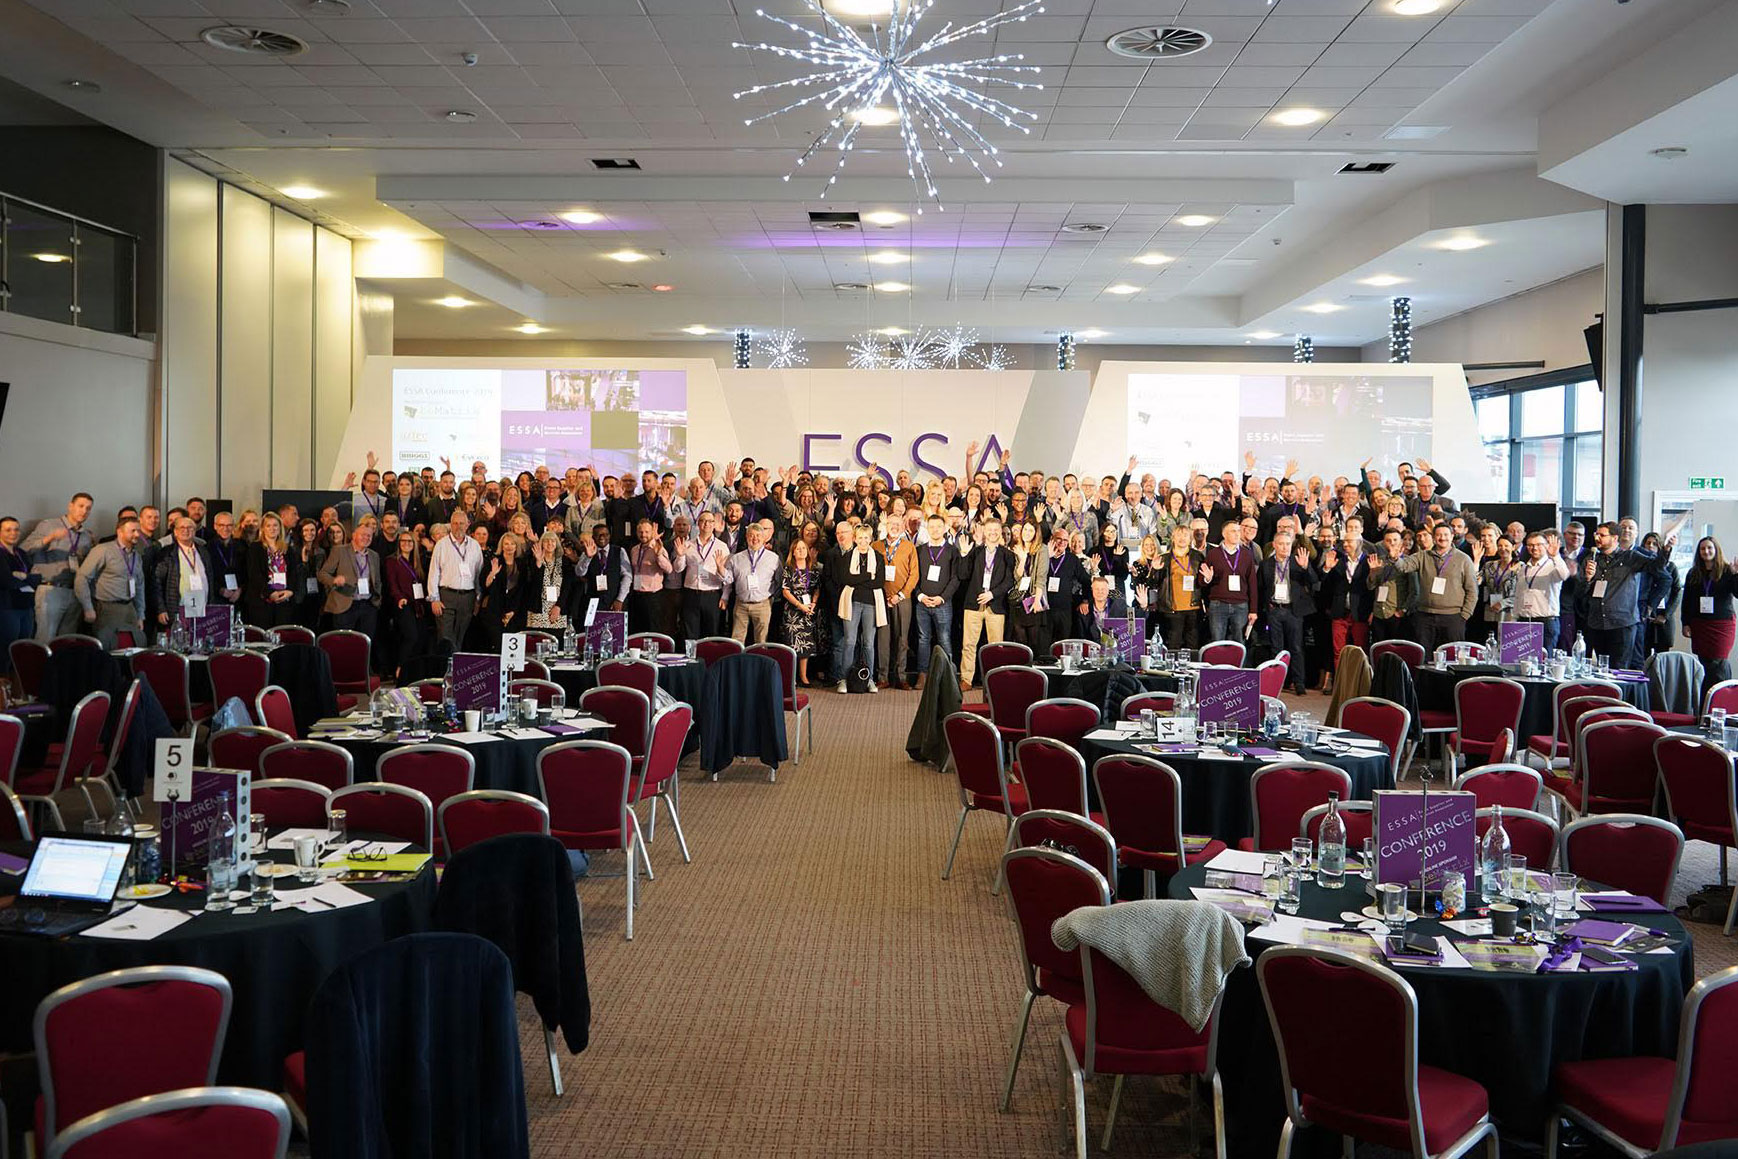 Video Highlights from the ESSA conference